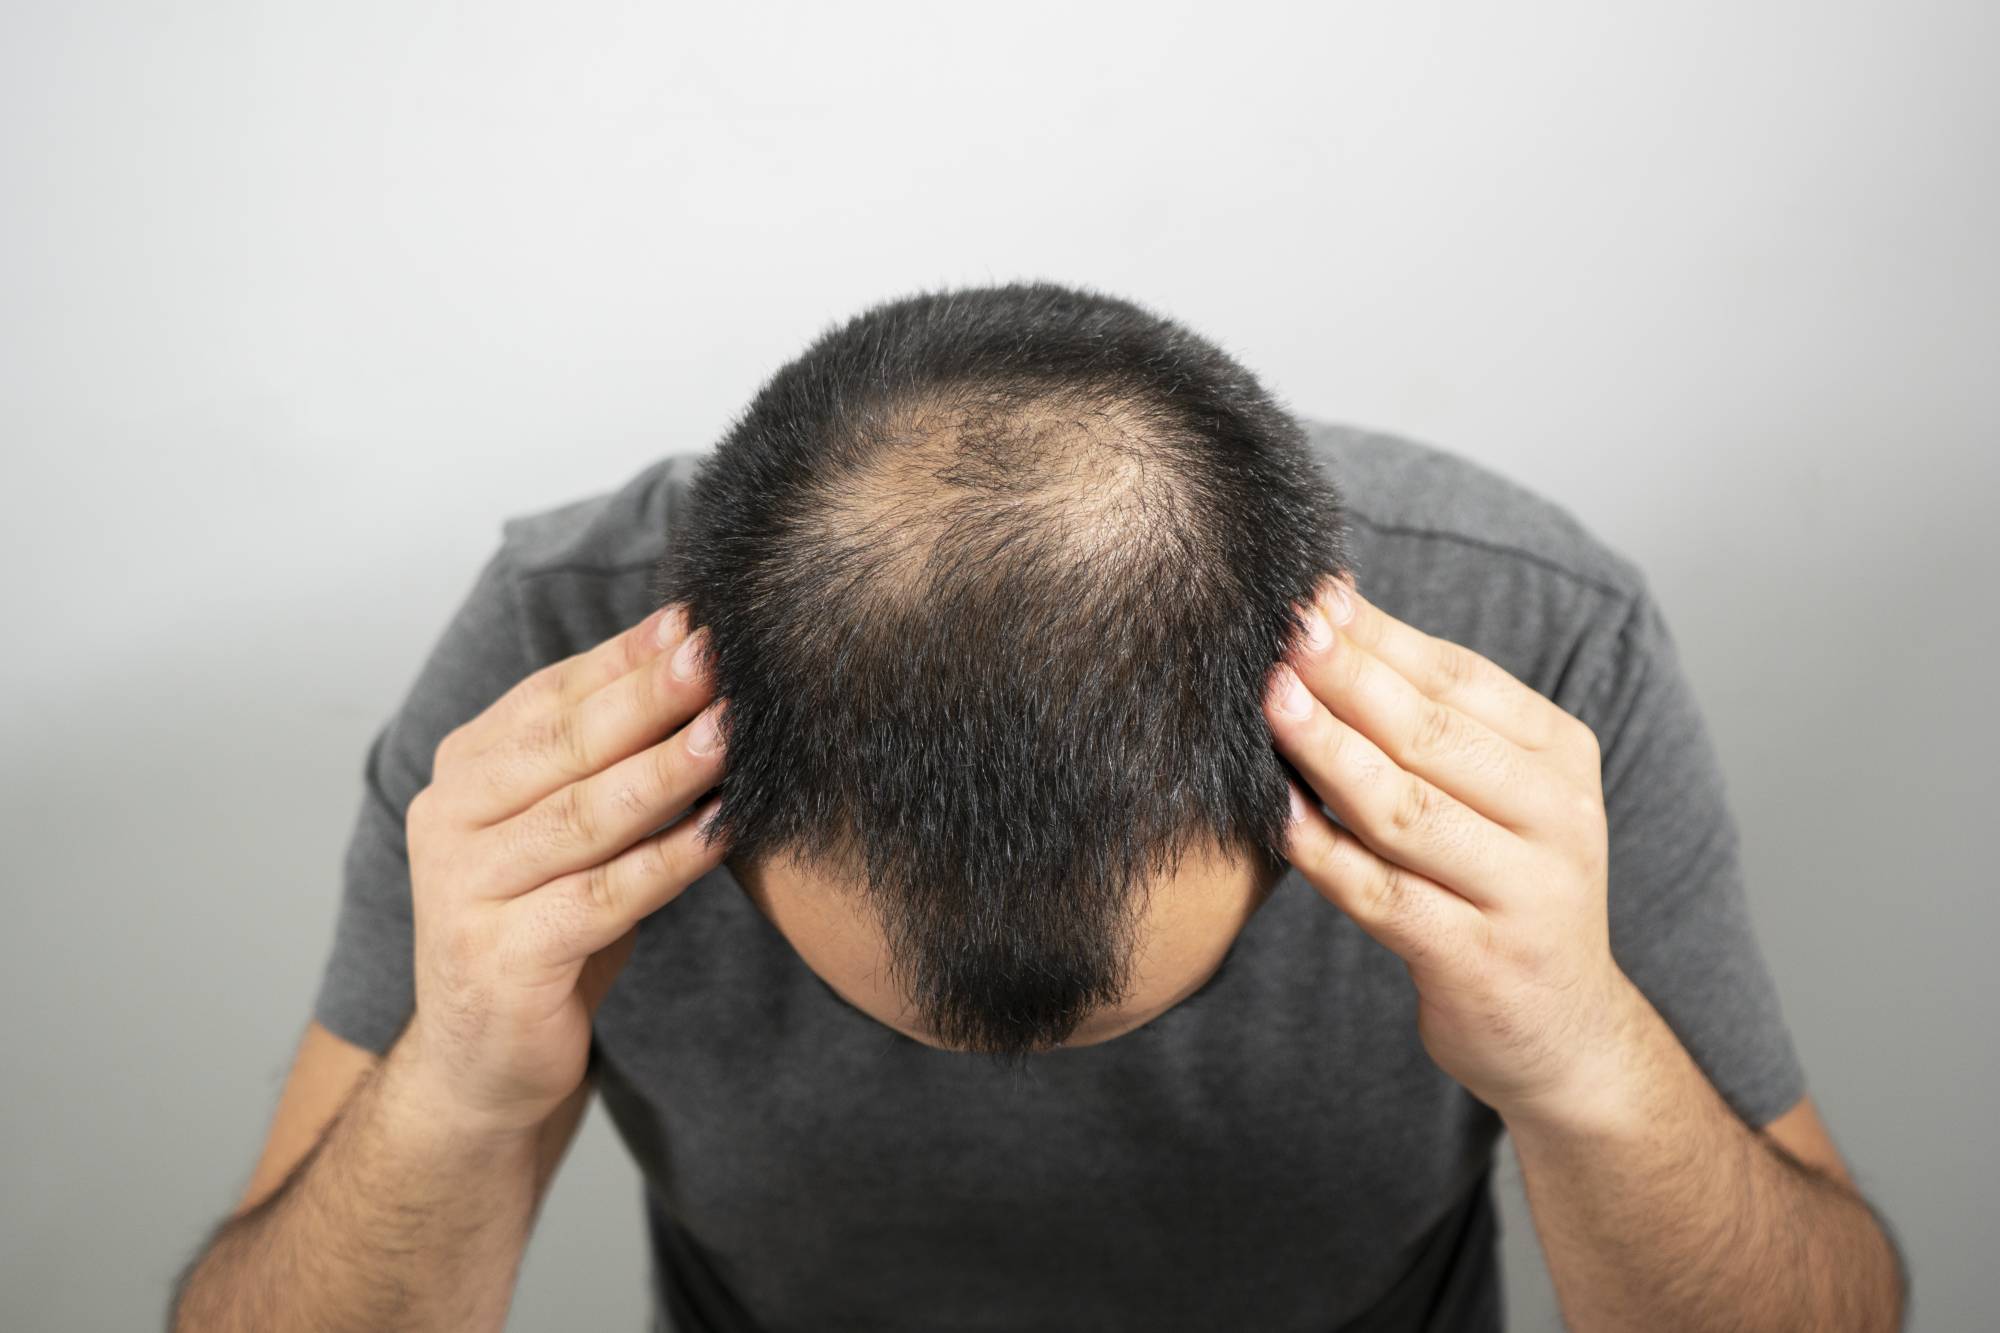 Stage 7 Baldness: Understand the Journey of Hair Transplant